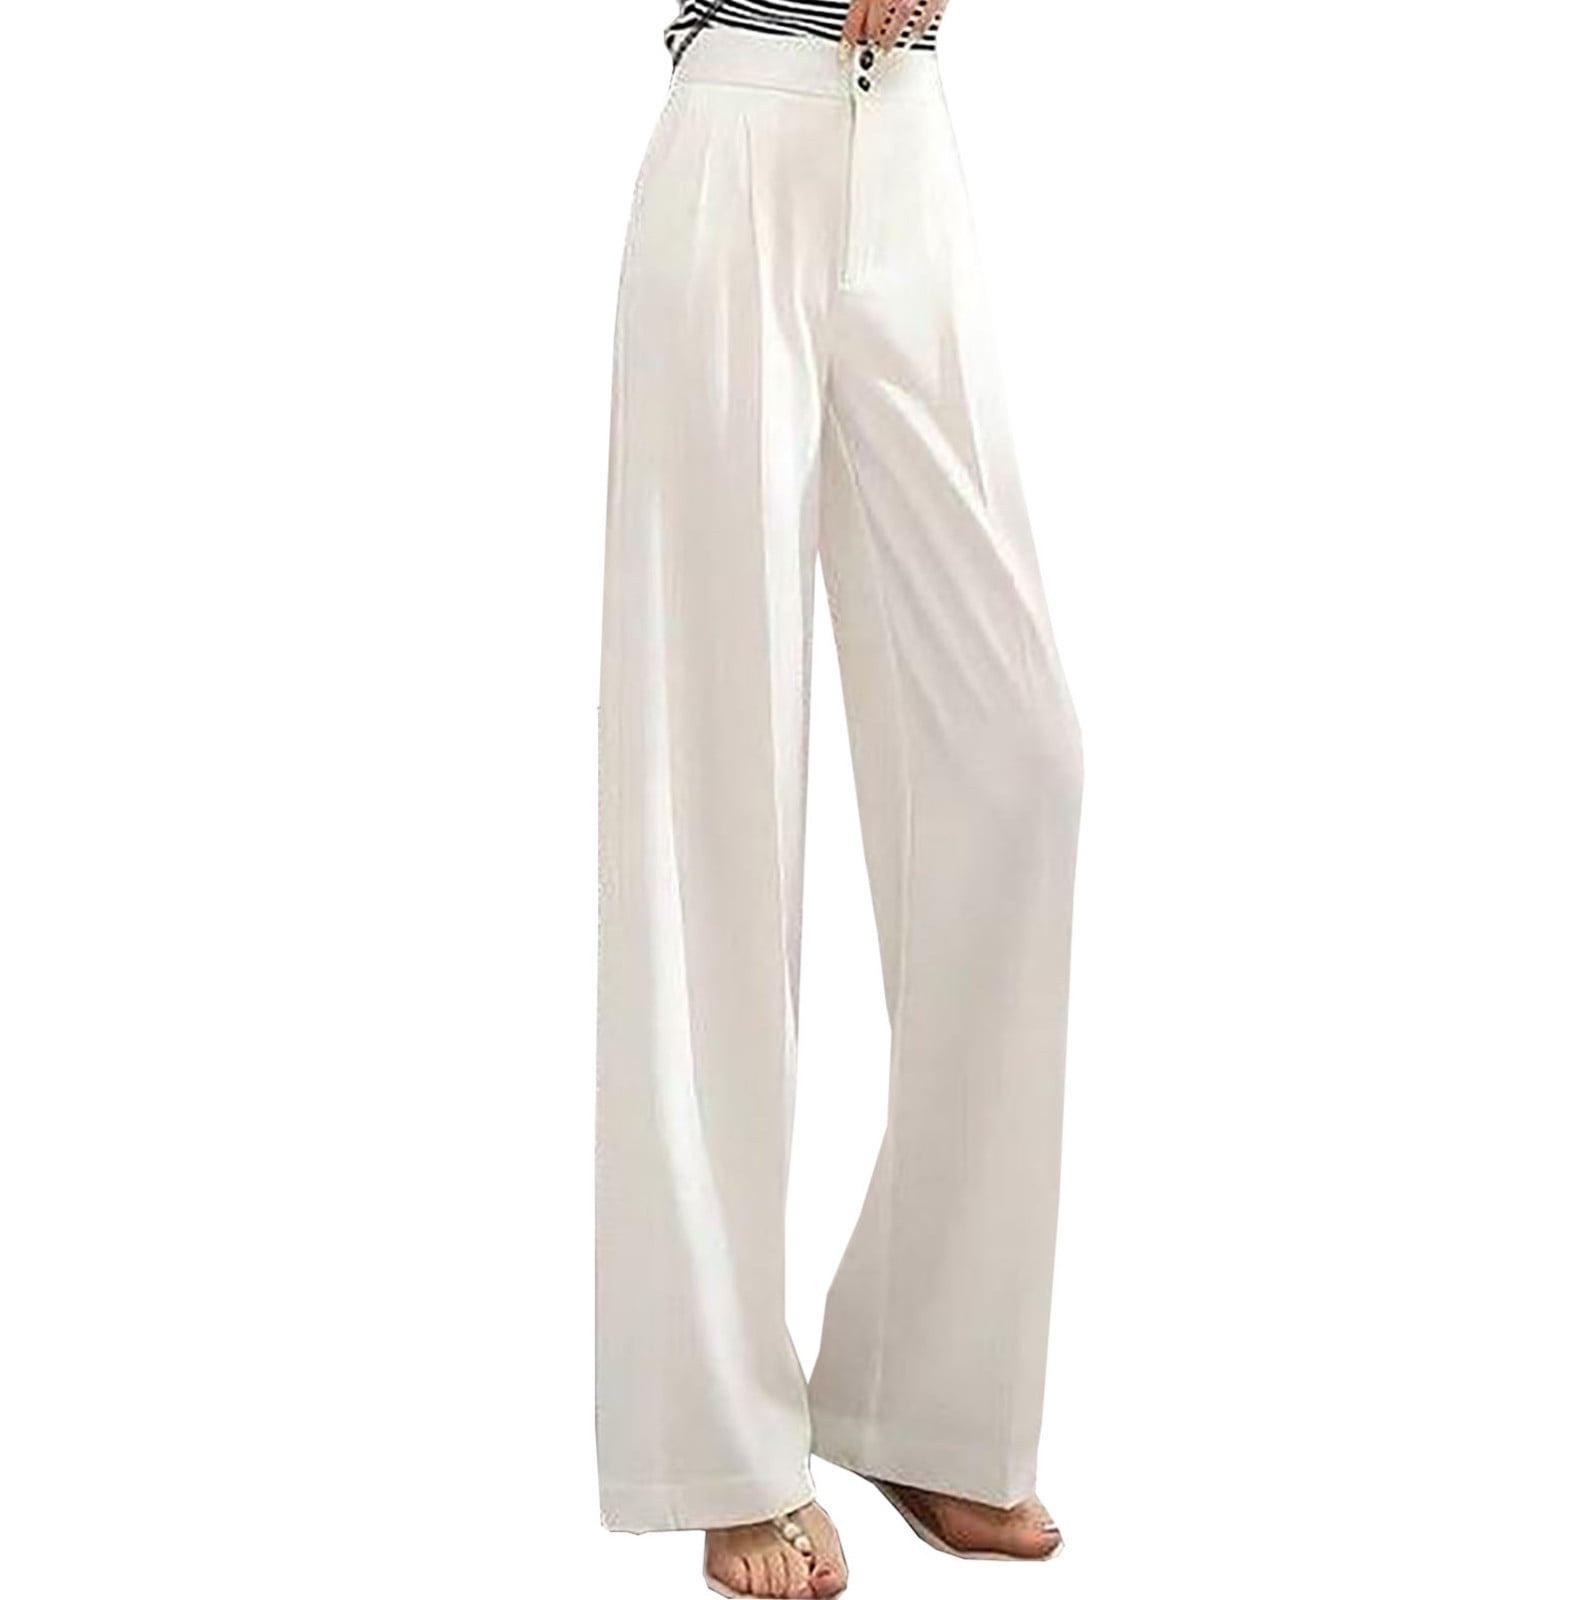 Woman's Casual Full-Length Loose Pants Solid Stretchy High Waist Trousers  Wide Leg Pants Sweatpants with Pockets